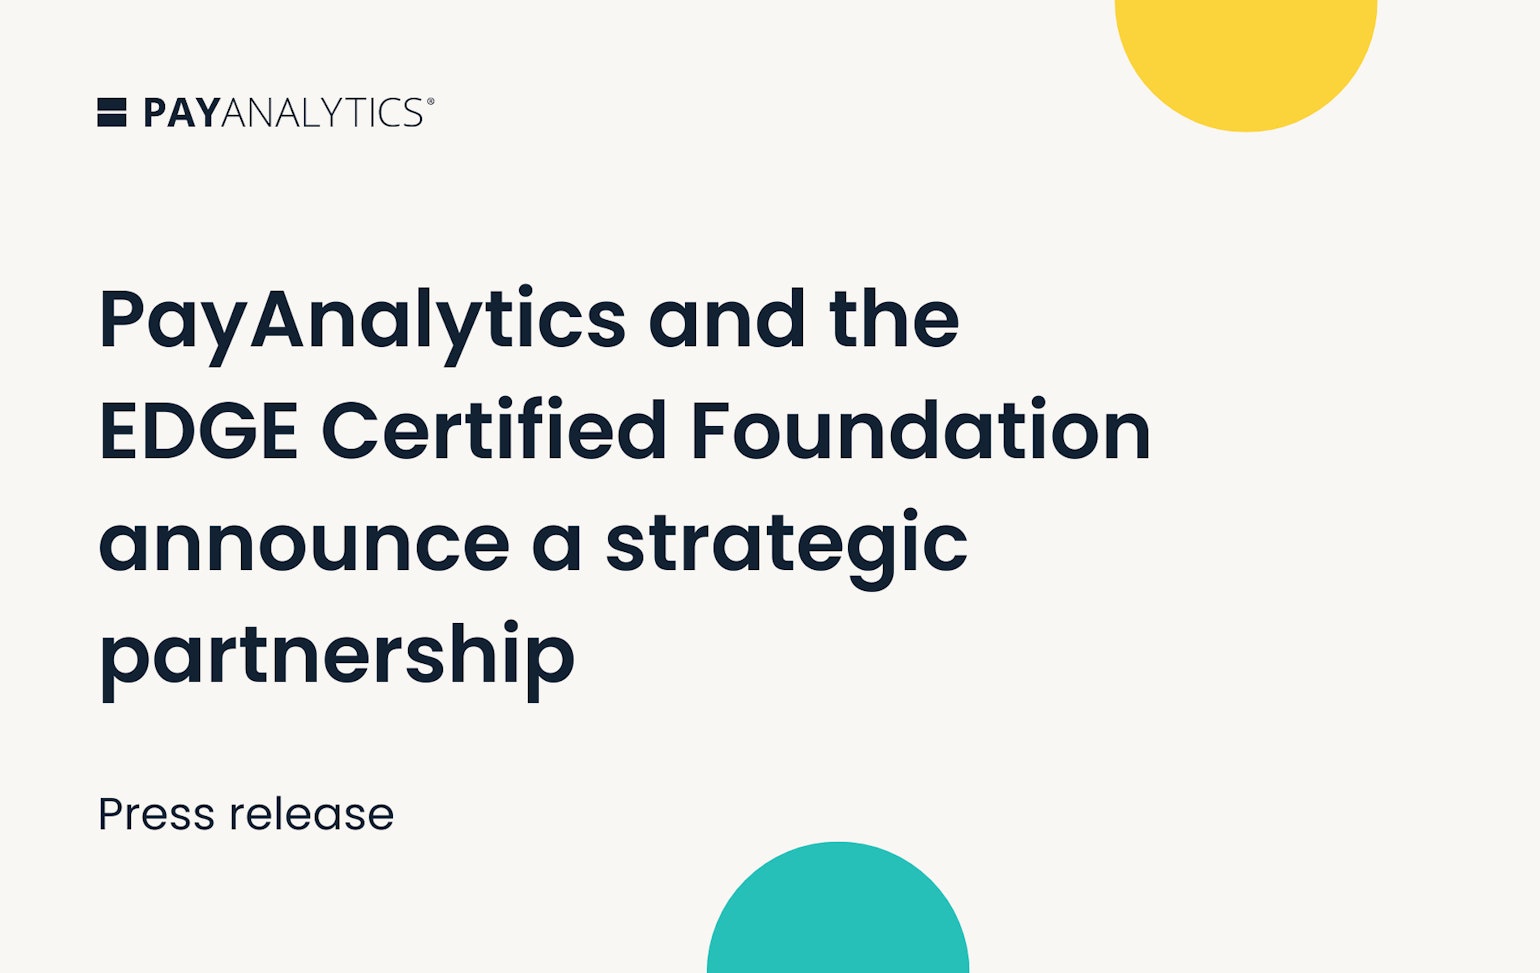 Image that announces that PayAnalytics and EDGE Certified Foundation Start a Strategic Partnership